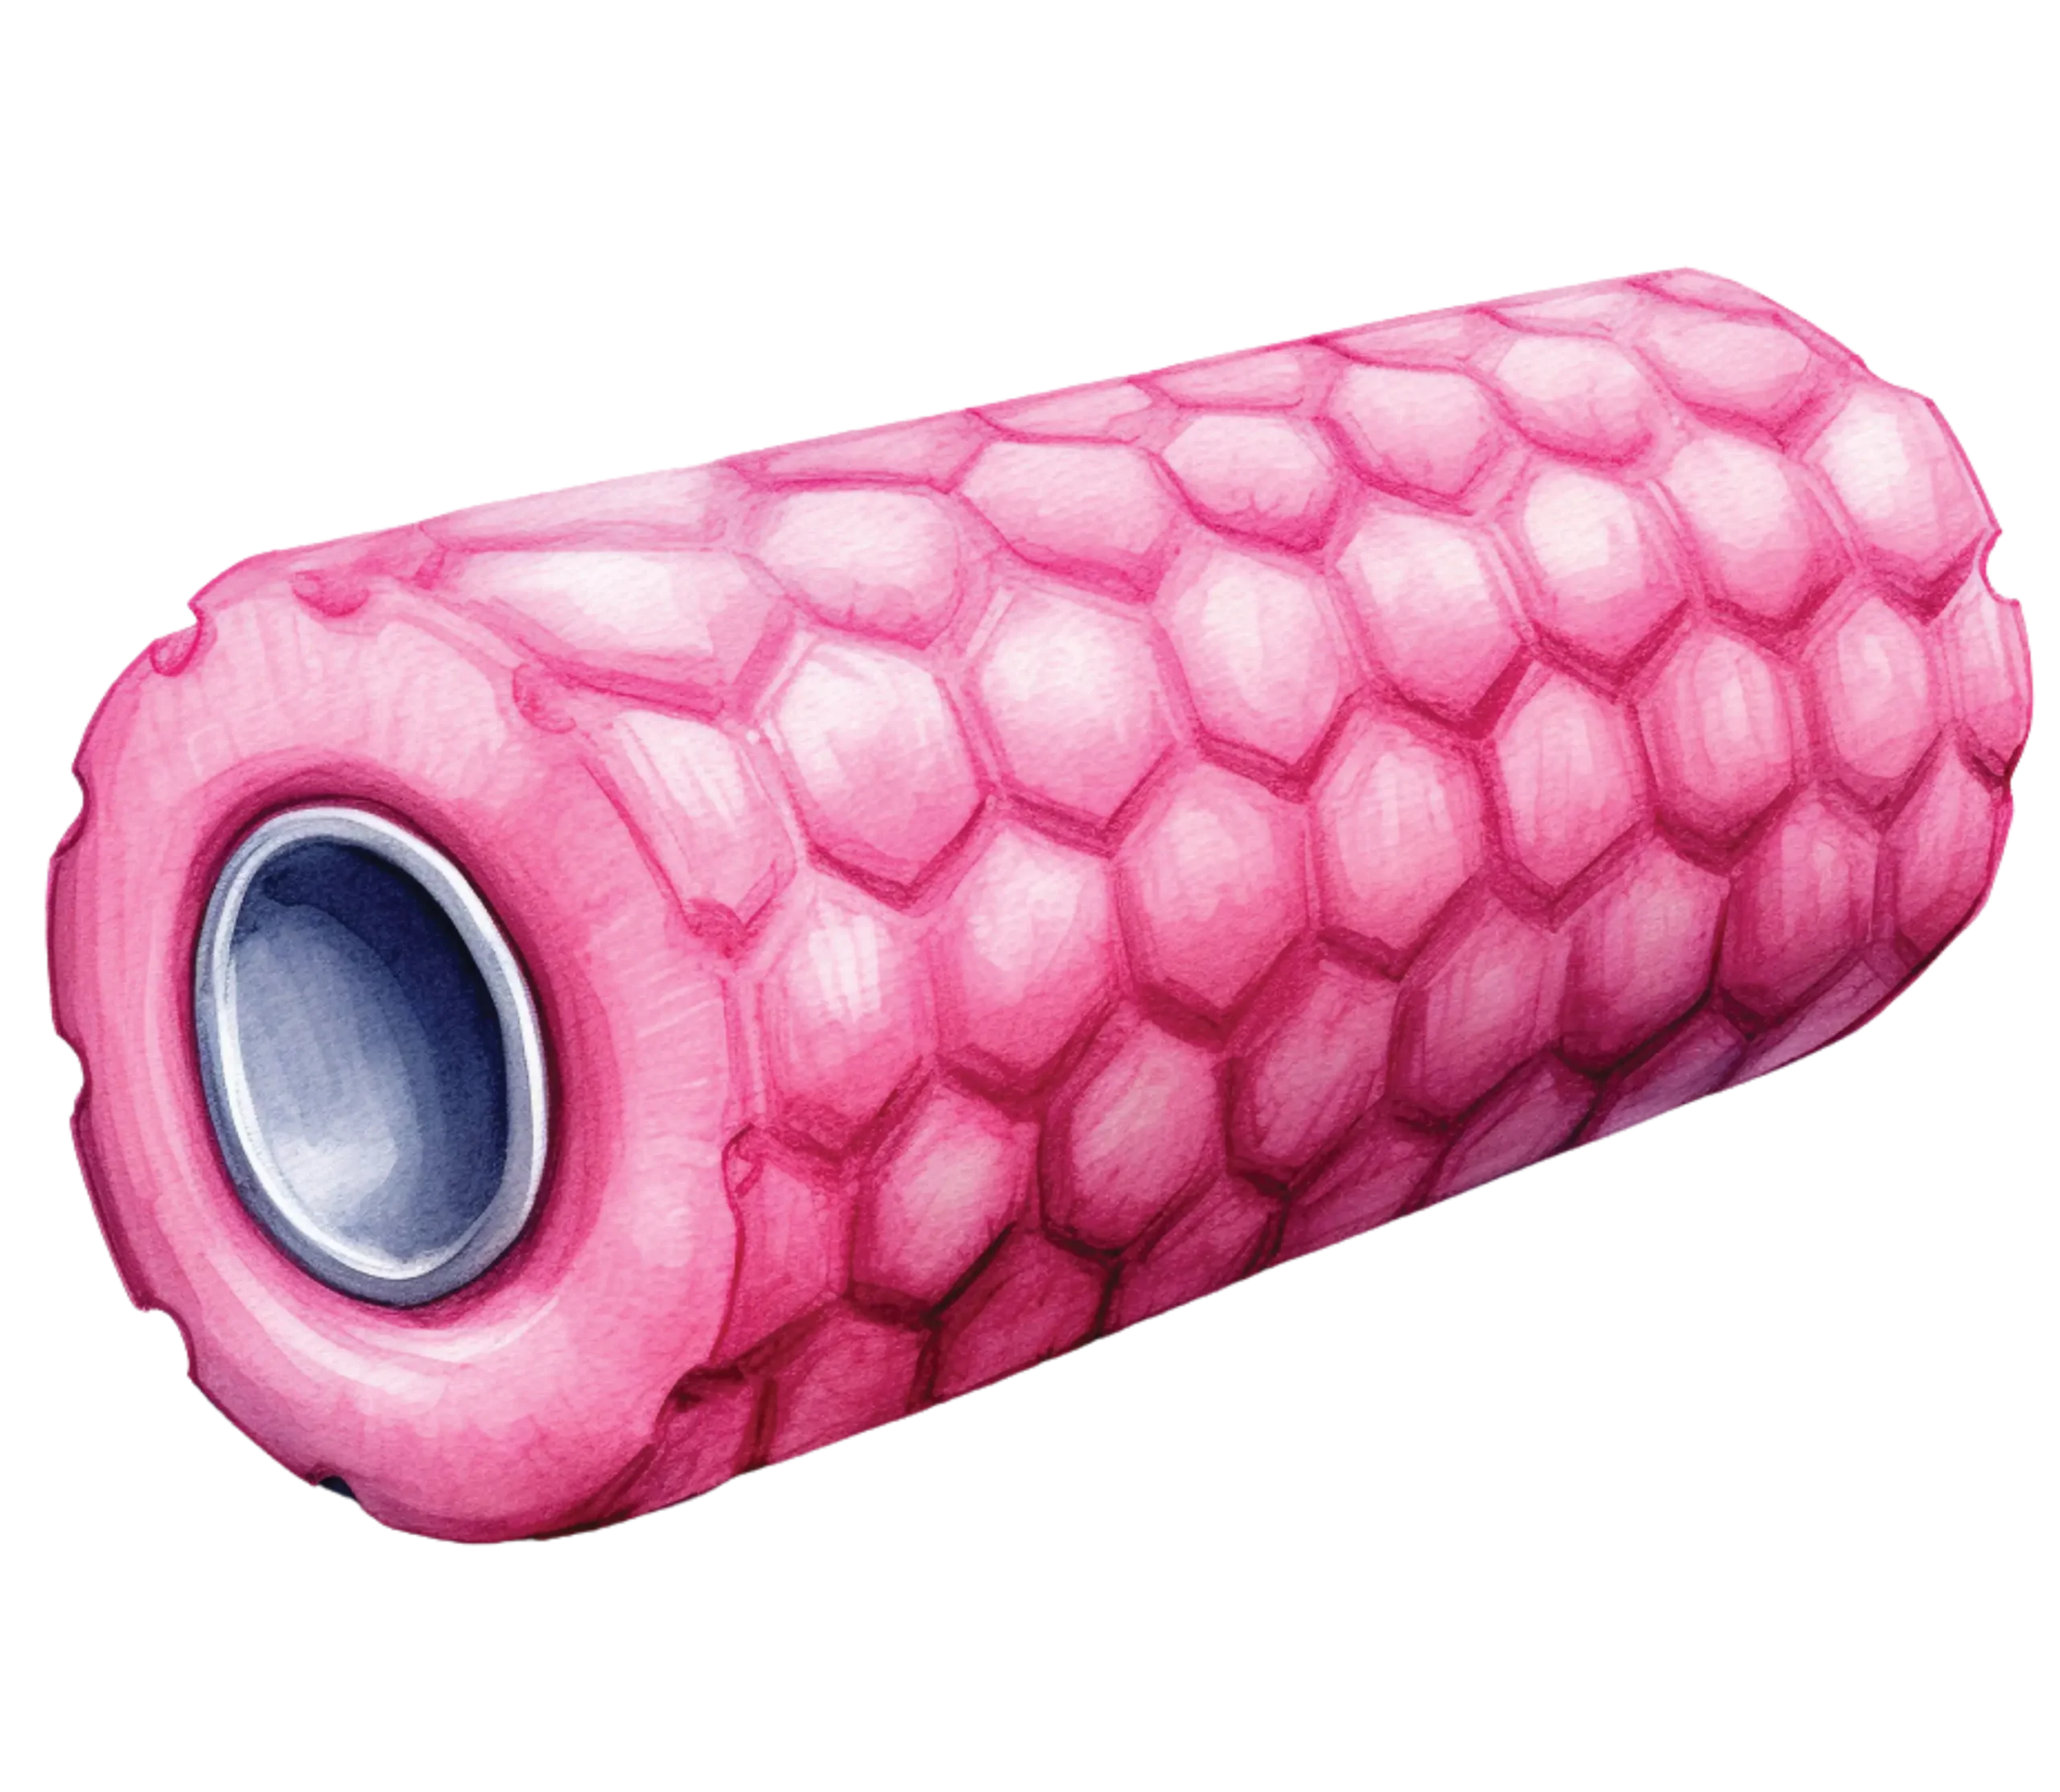 foam roller for working out at home